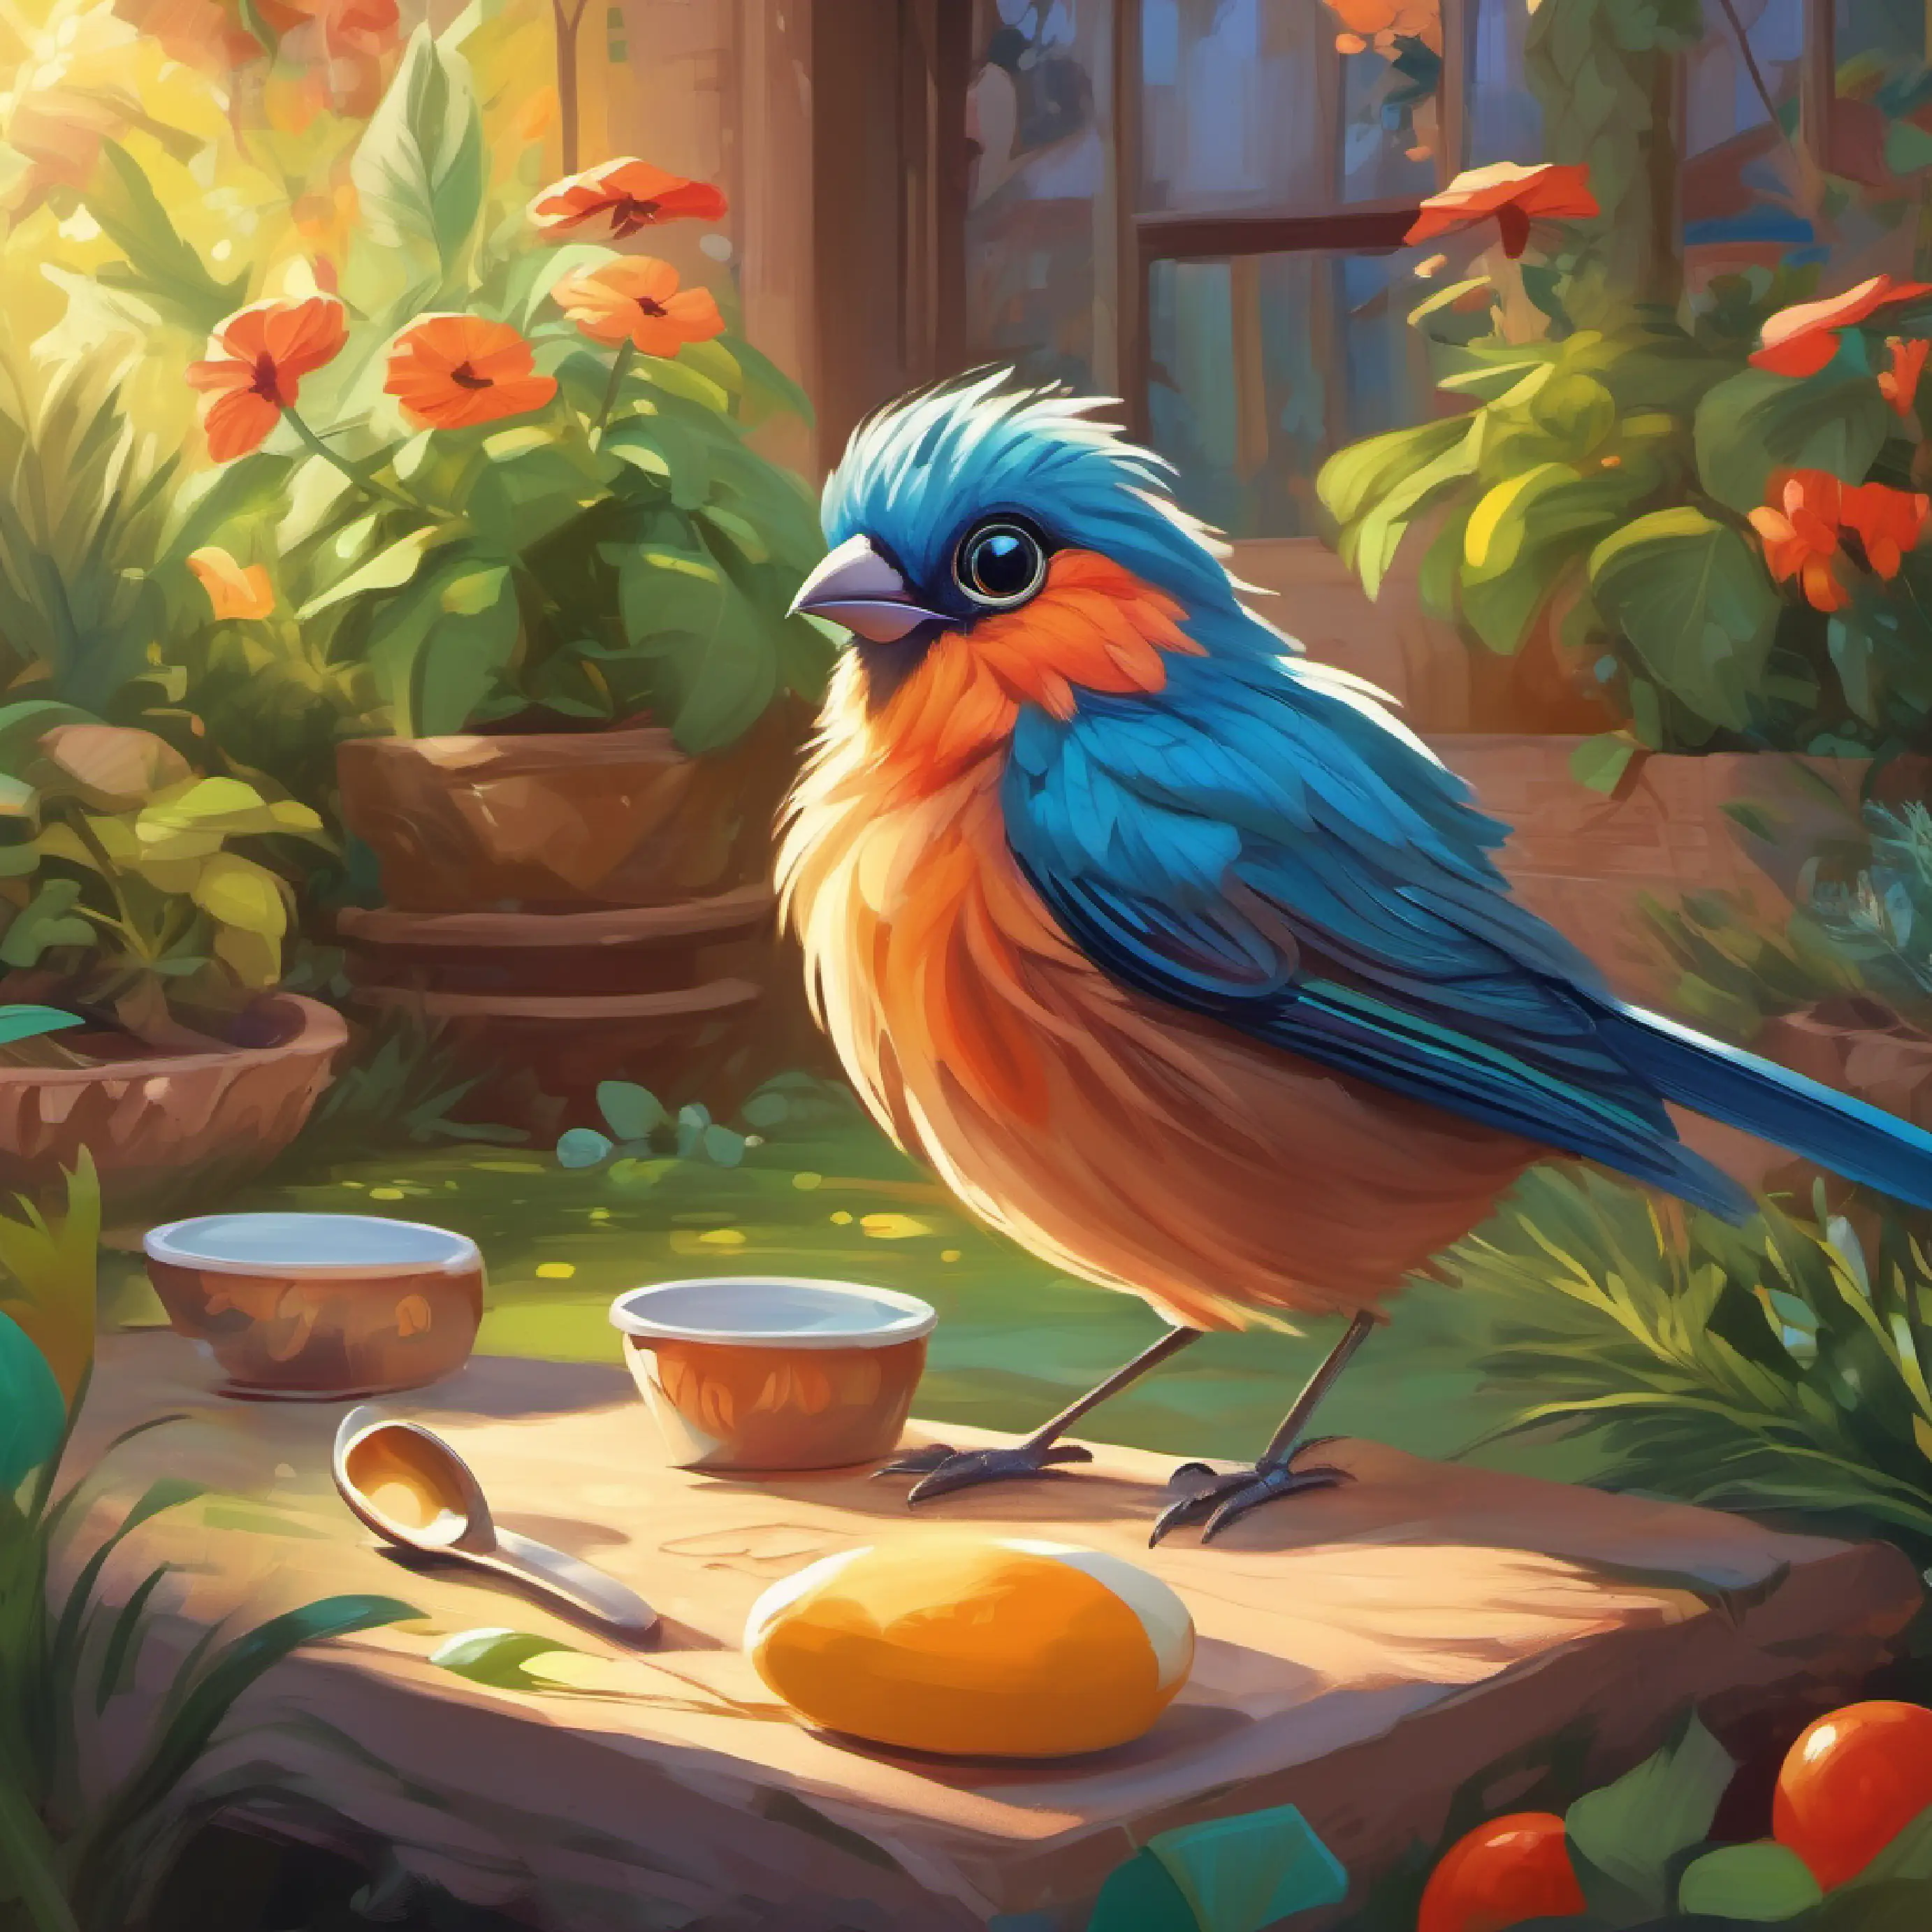 a young, energetic bird with vibrant feathers and big, curious eyes finds a garden party, but realizes he missed breakfast time.